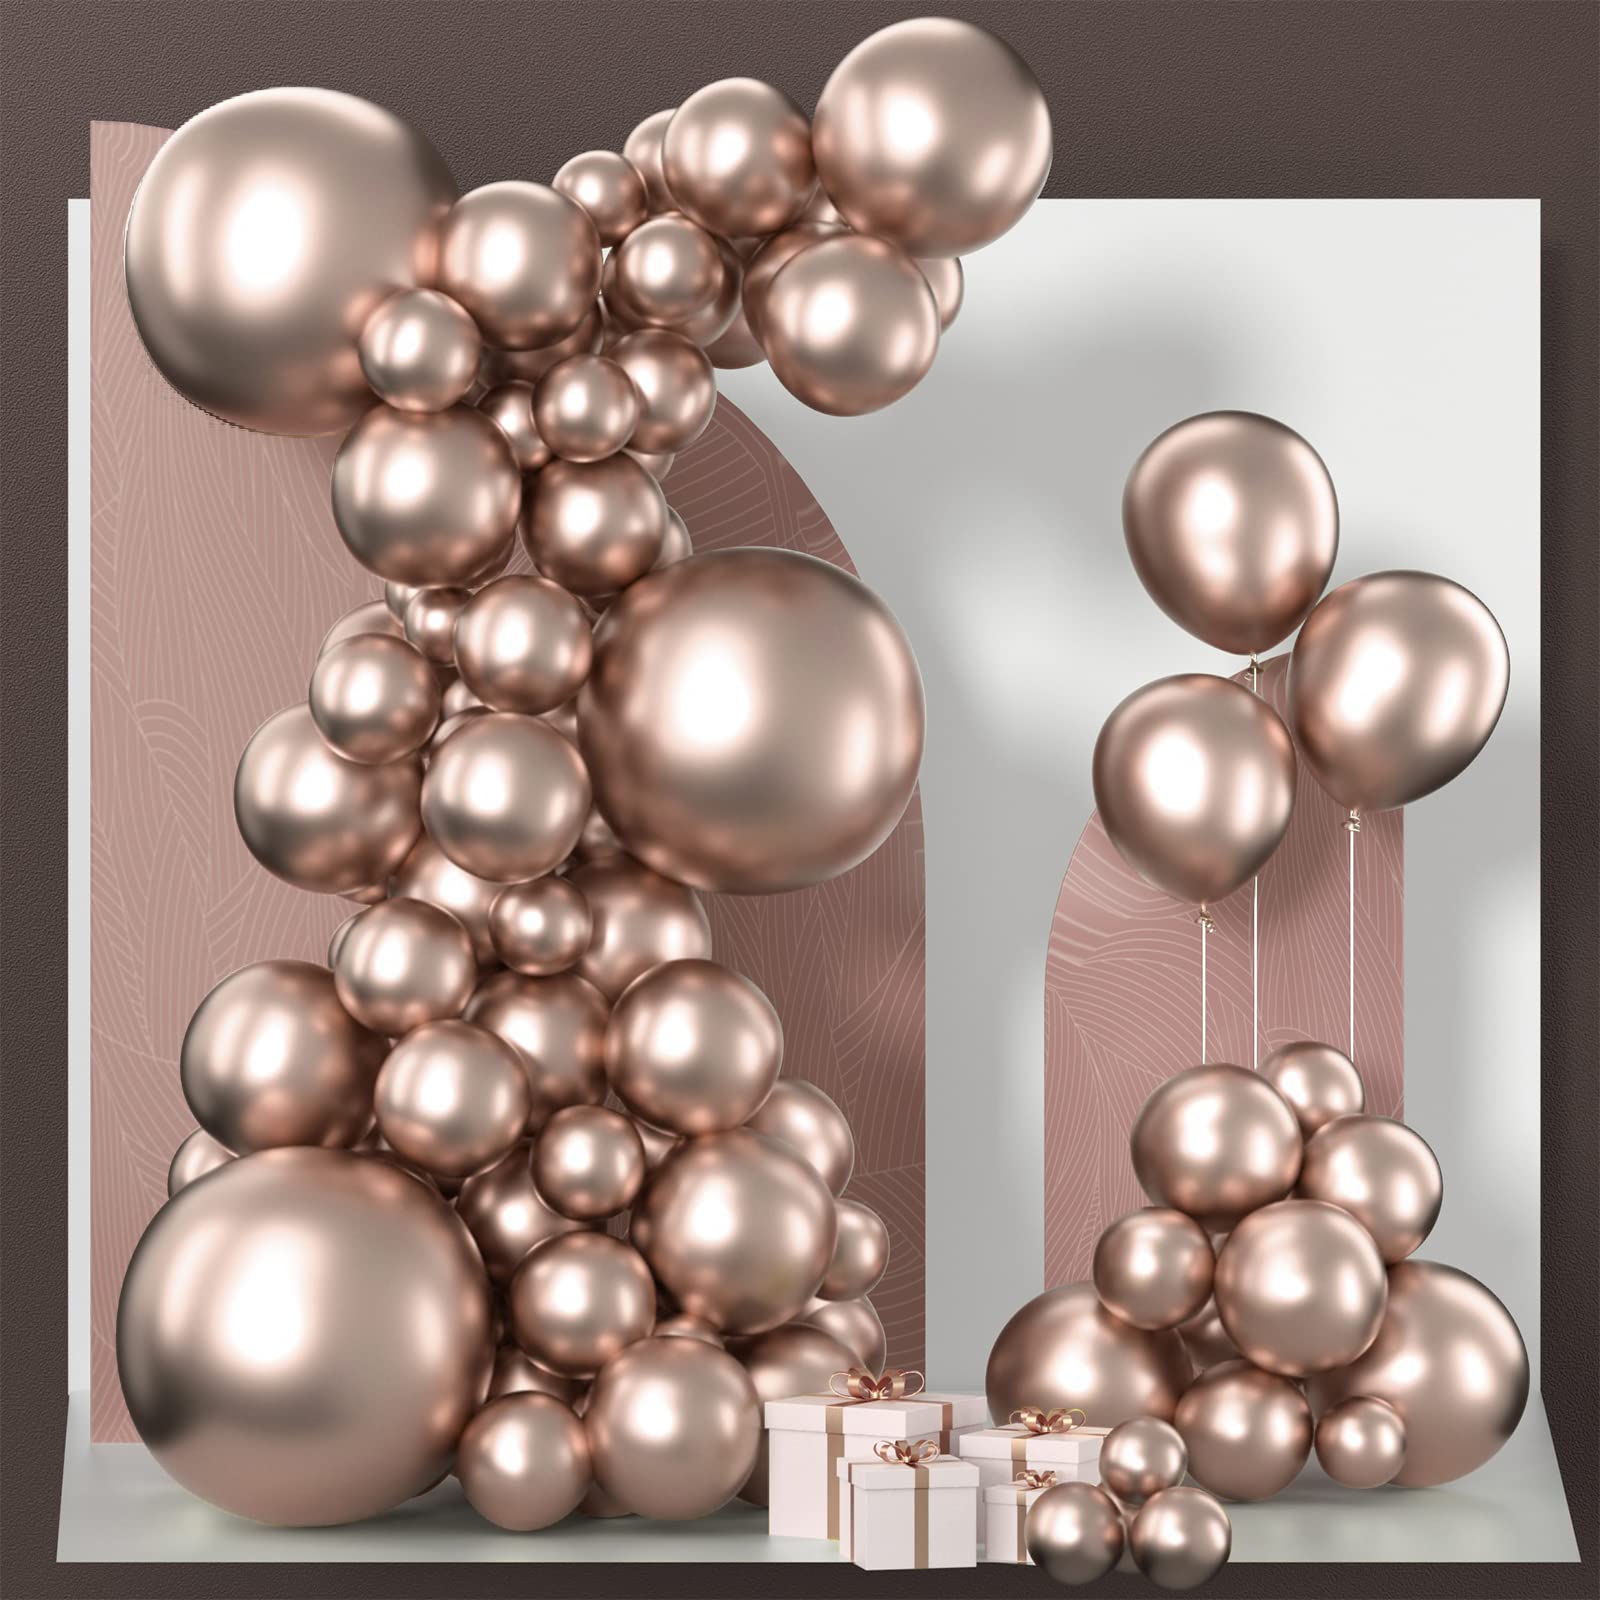 PartyWoo Metallic Champagne Gold Balloons, 85 pcs Champagne Gold Balloons Different Sizes Pack of 18 Inch 12 Inch 10 Inch 5 Inch Balloons for Balloon Garland as Party Decorations, Champagne Gold-G112